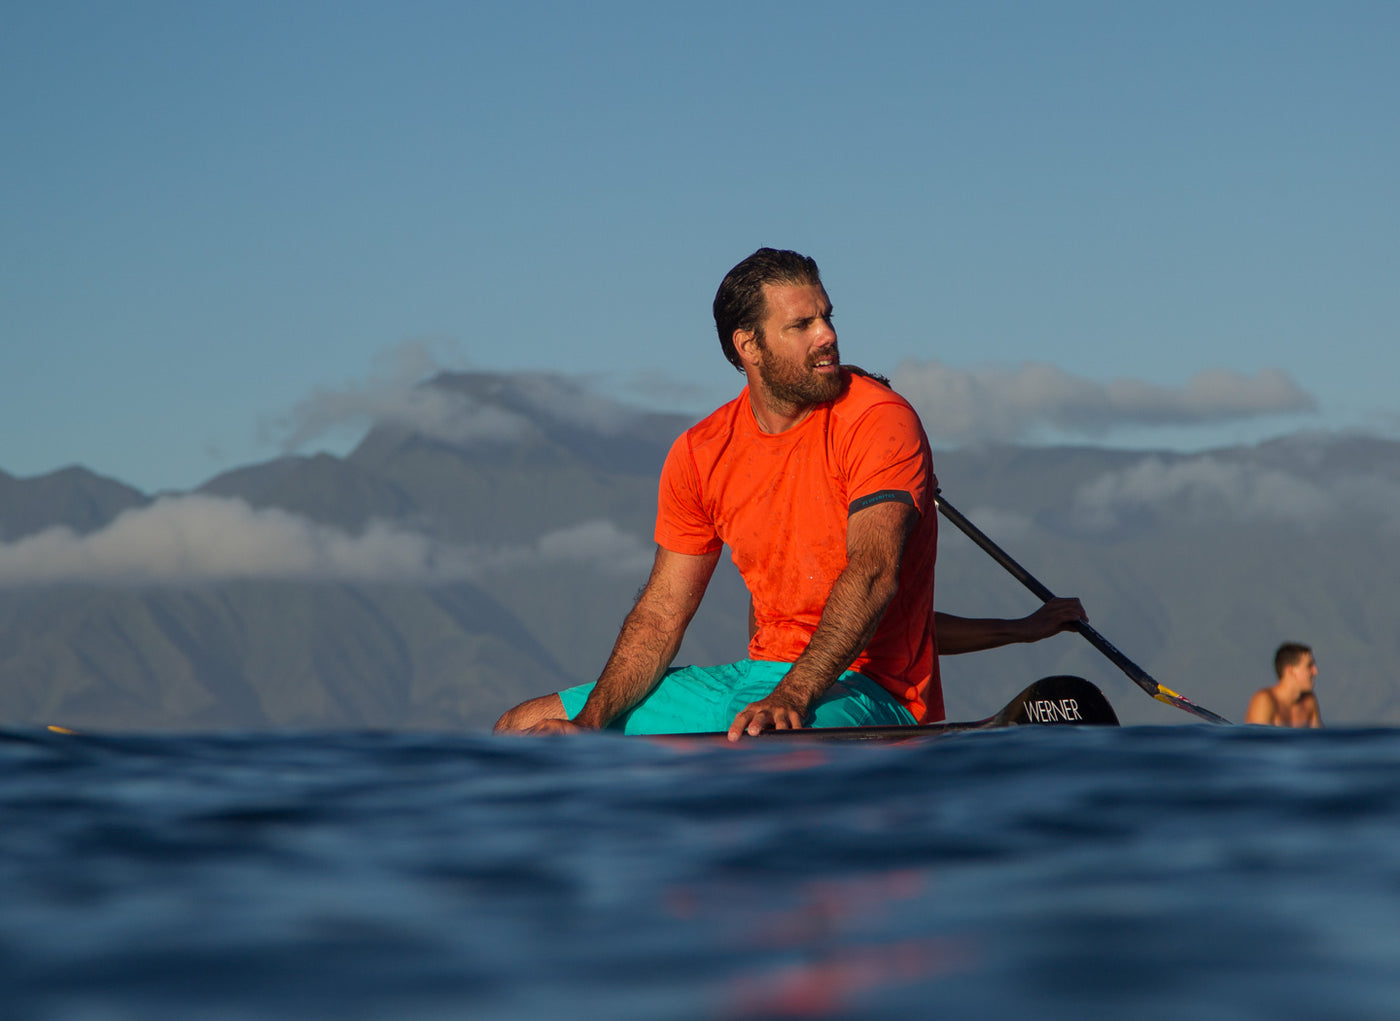  The Lane Hydrophobic Shirt for Men - The Best Shirt for Sup Surfing Sailing | By Bluesmiths